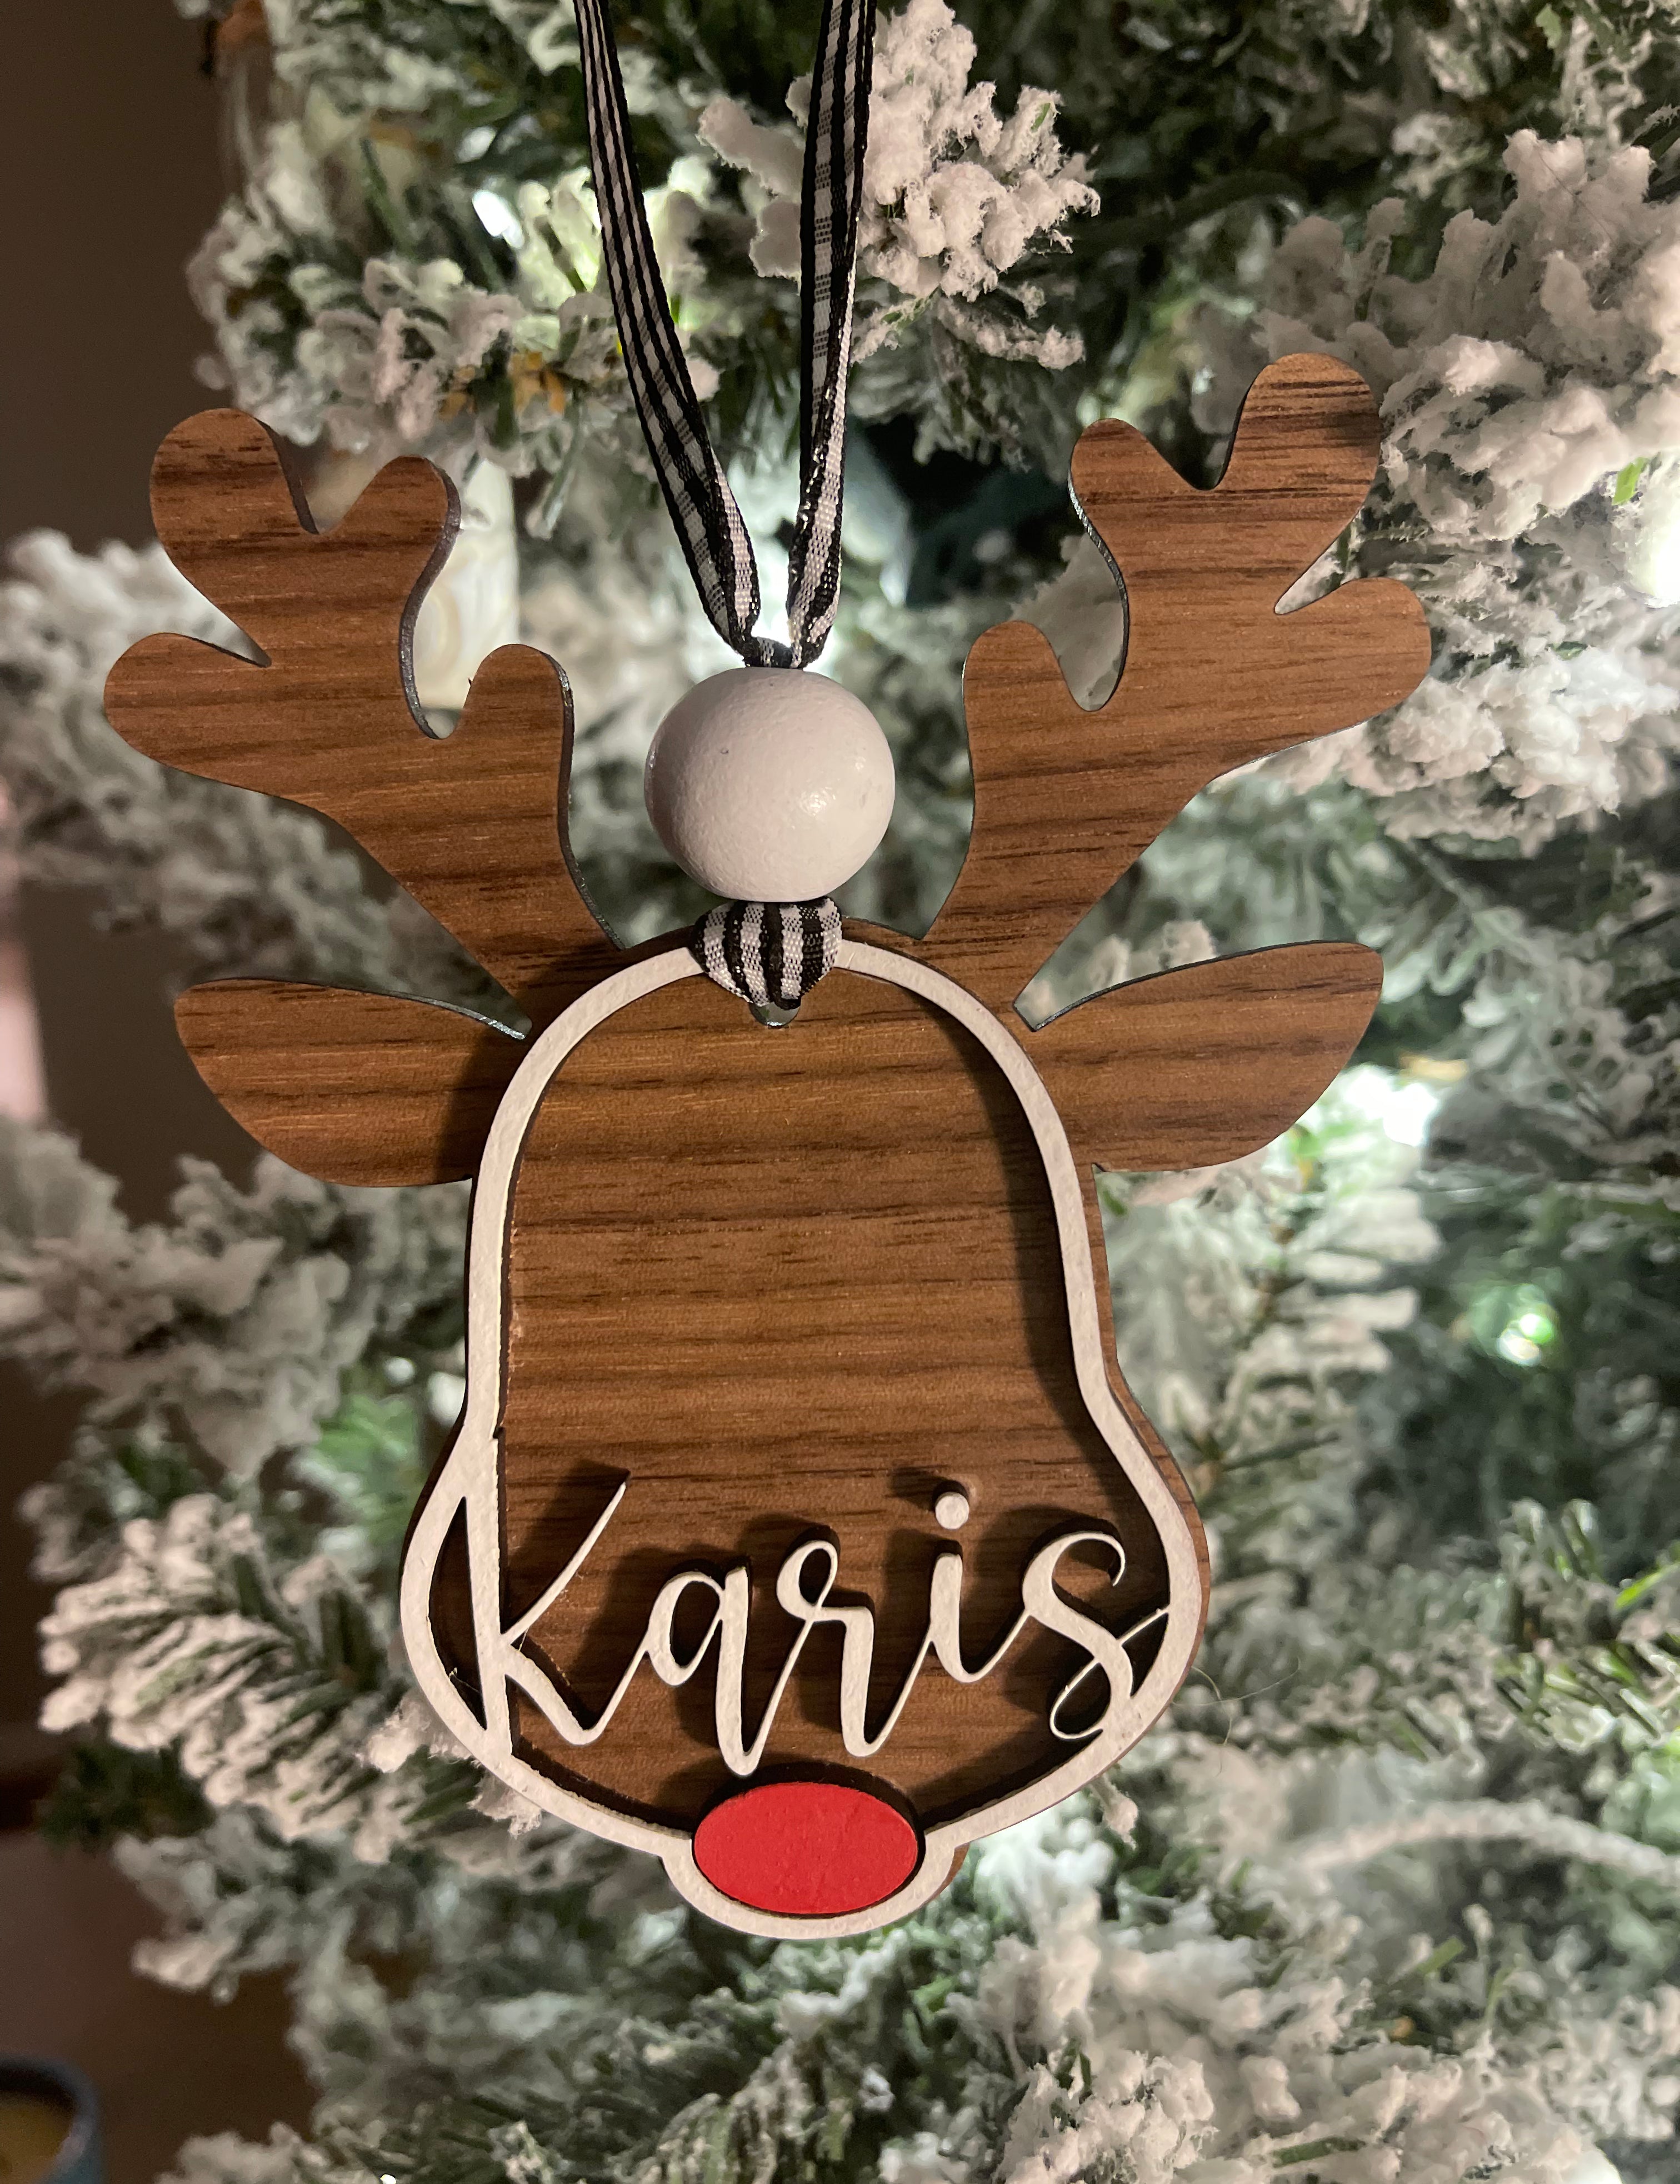 This reindeer ornament has the 3D name cutout.